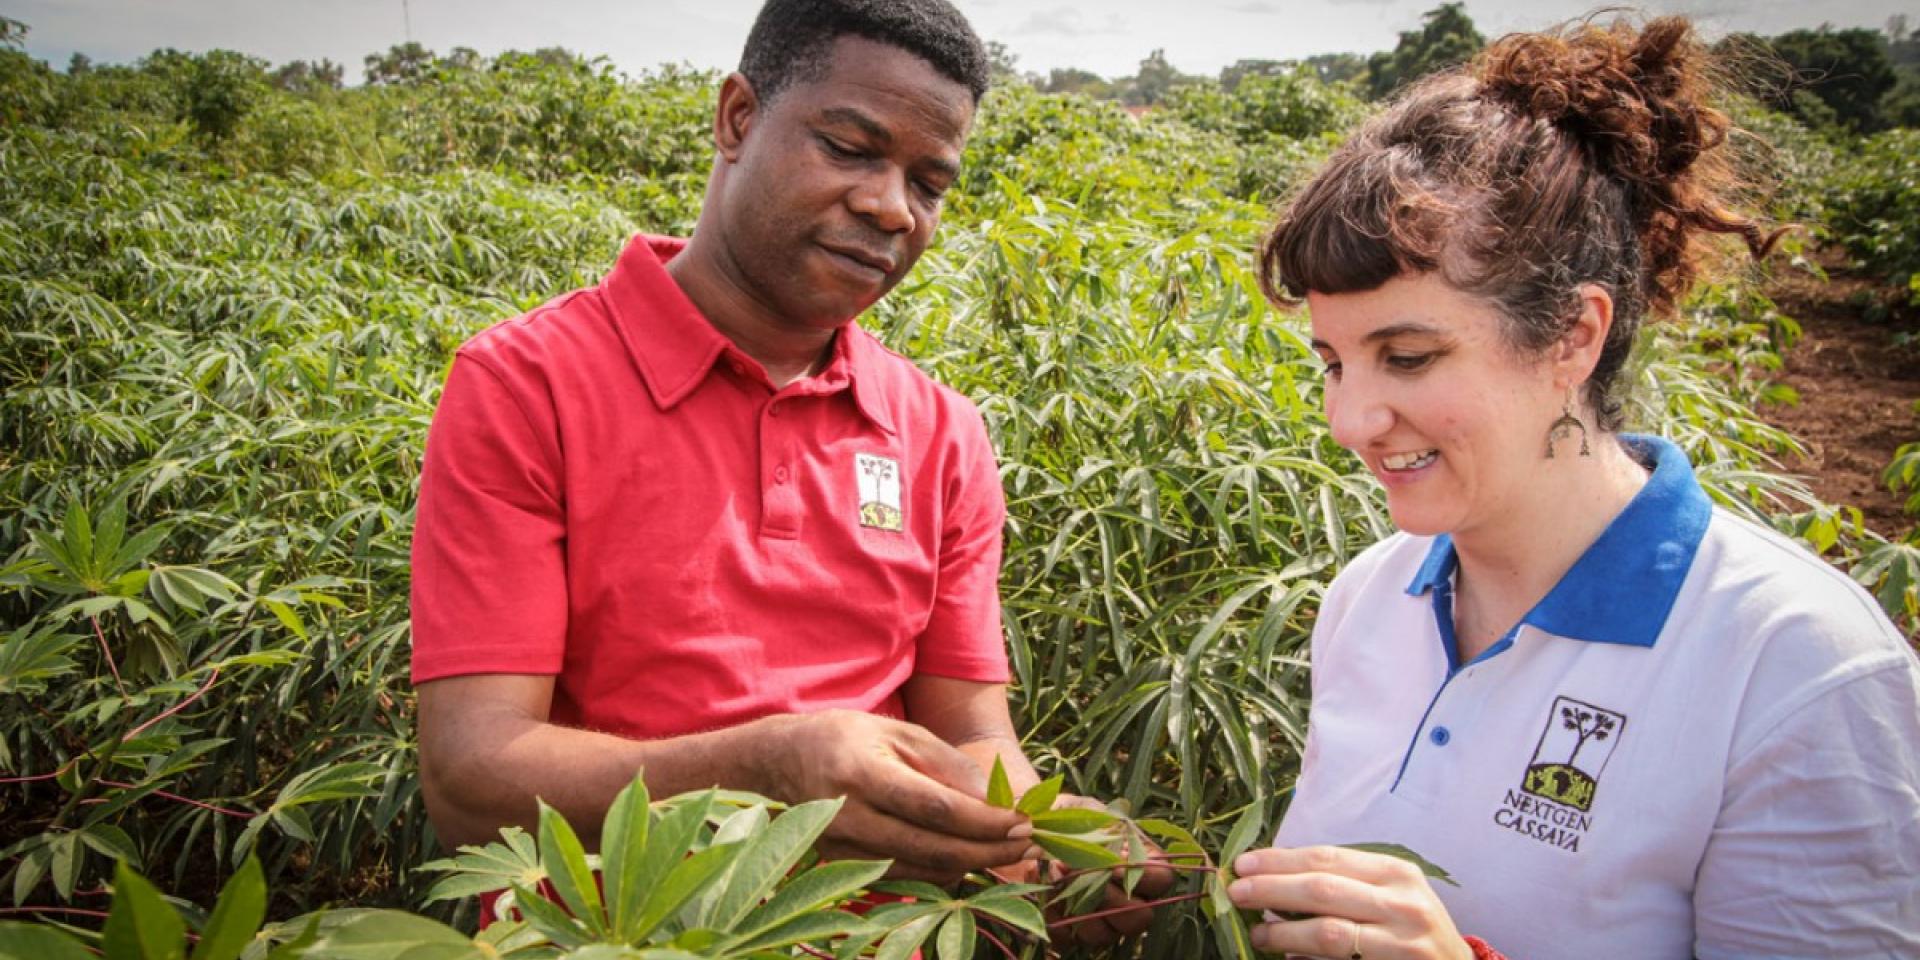 Hale Ann Tufan, right, inspects a cassava plant with Chiedozie Egesi, program director for the NextGen Cassava project, during a visit to research fields in Namulonge, Uganda